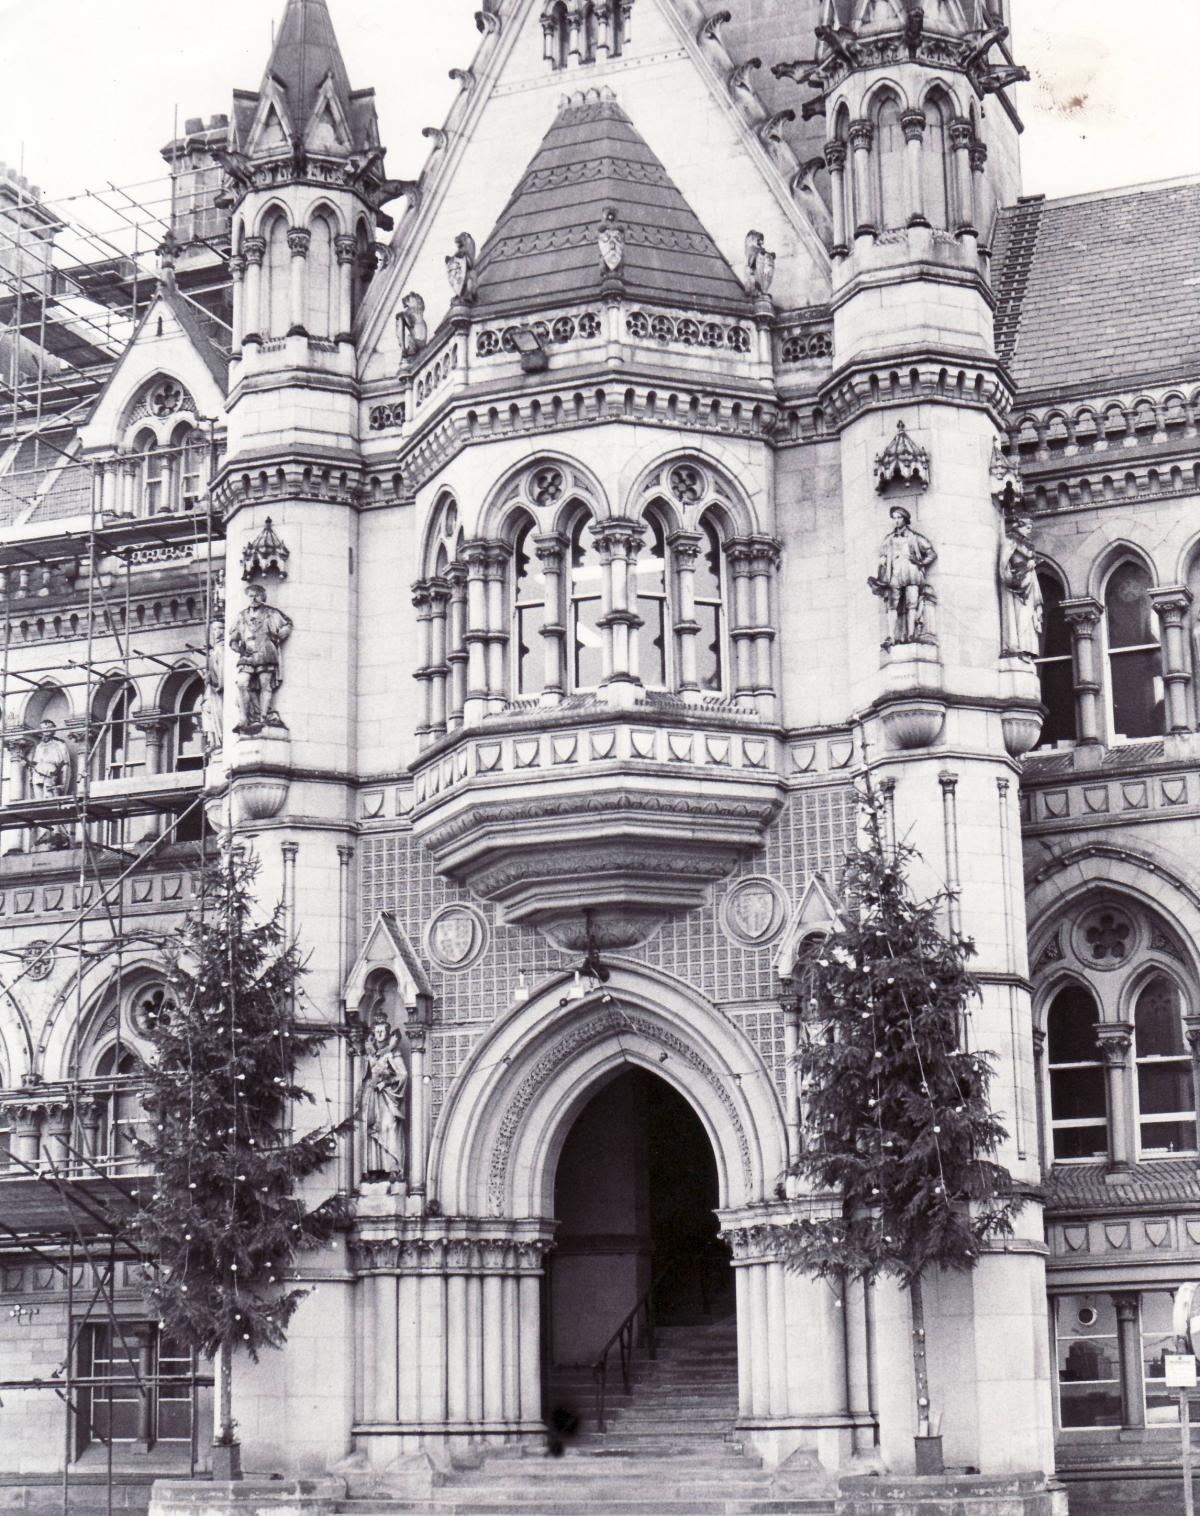 Some Christmas trees, with rather long trunks, outside City Hall in 1984